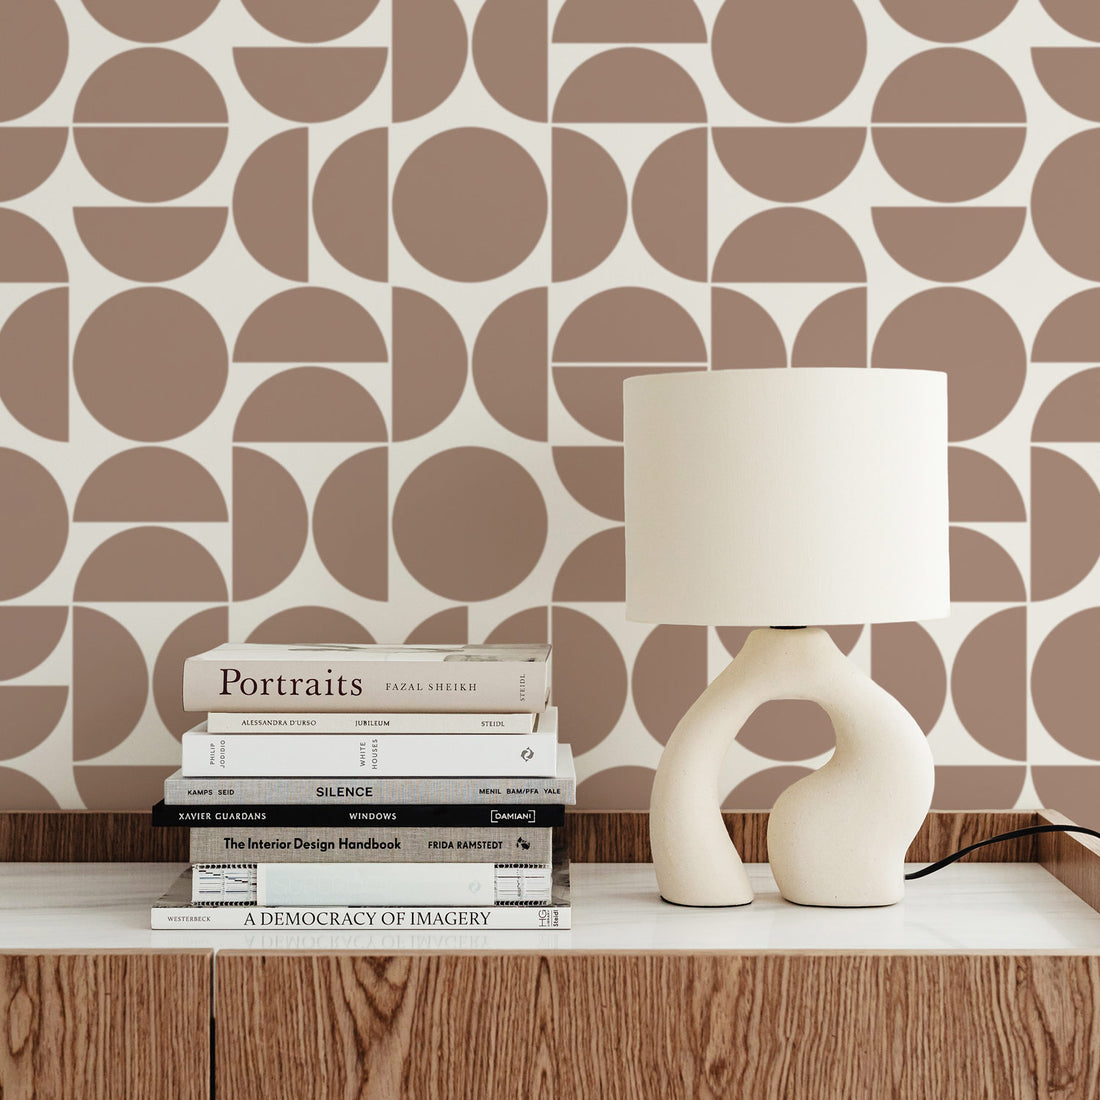 brown geometric shapes printed removable wallpaper